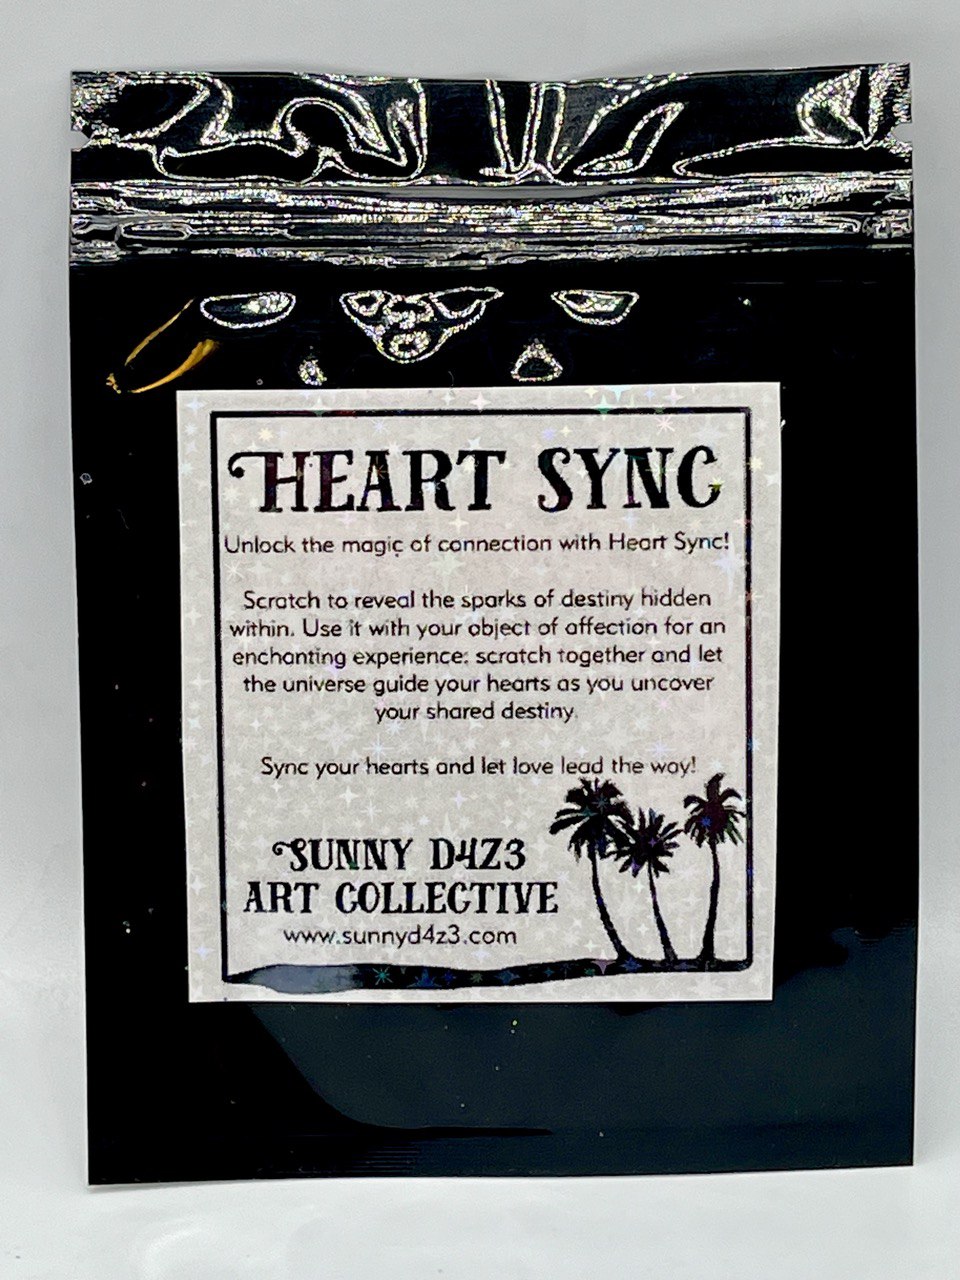 back of heart sync packaging with heart sync label:  the title is : heart sync.  sunny d4z3 art collective